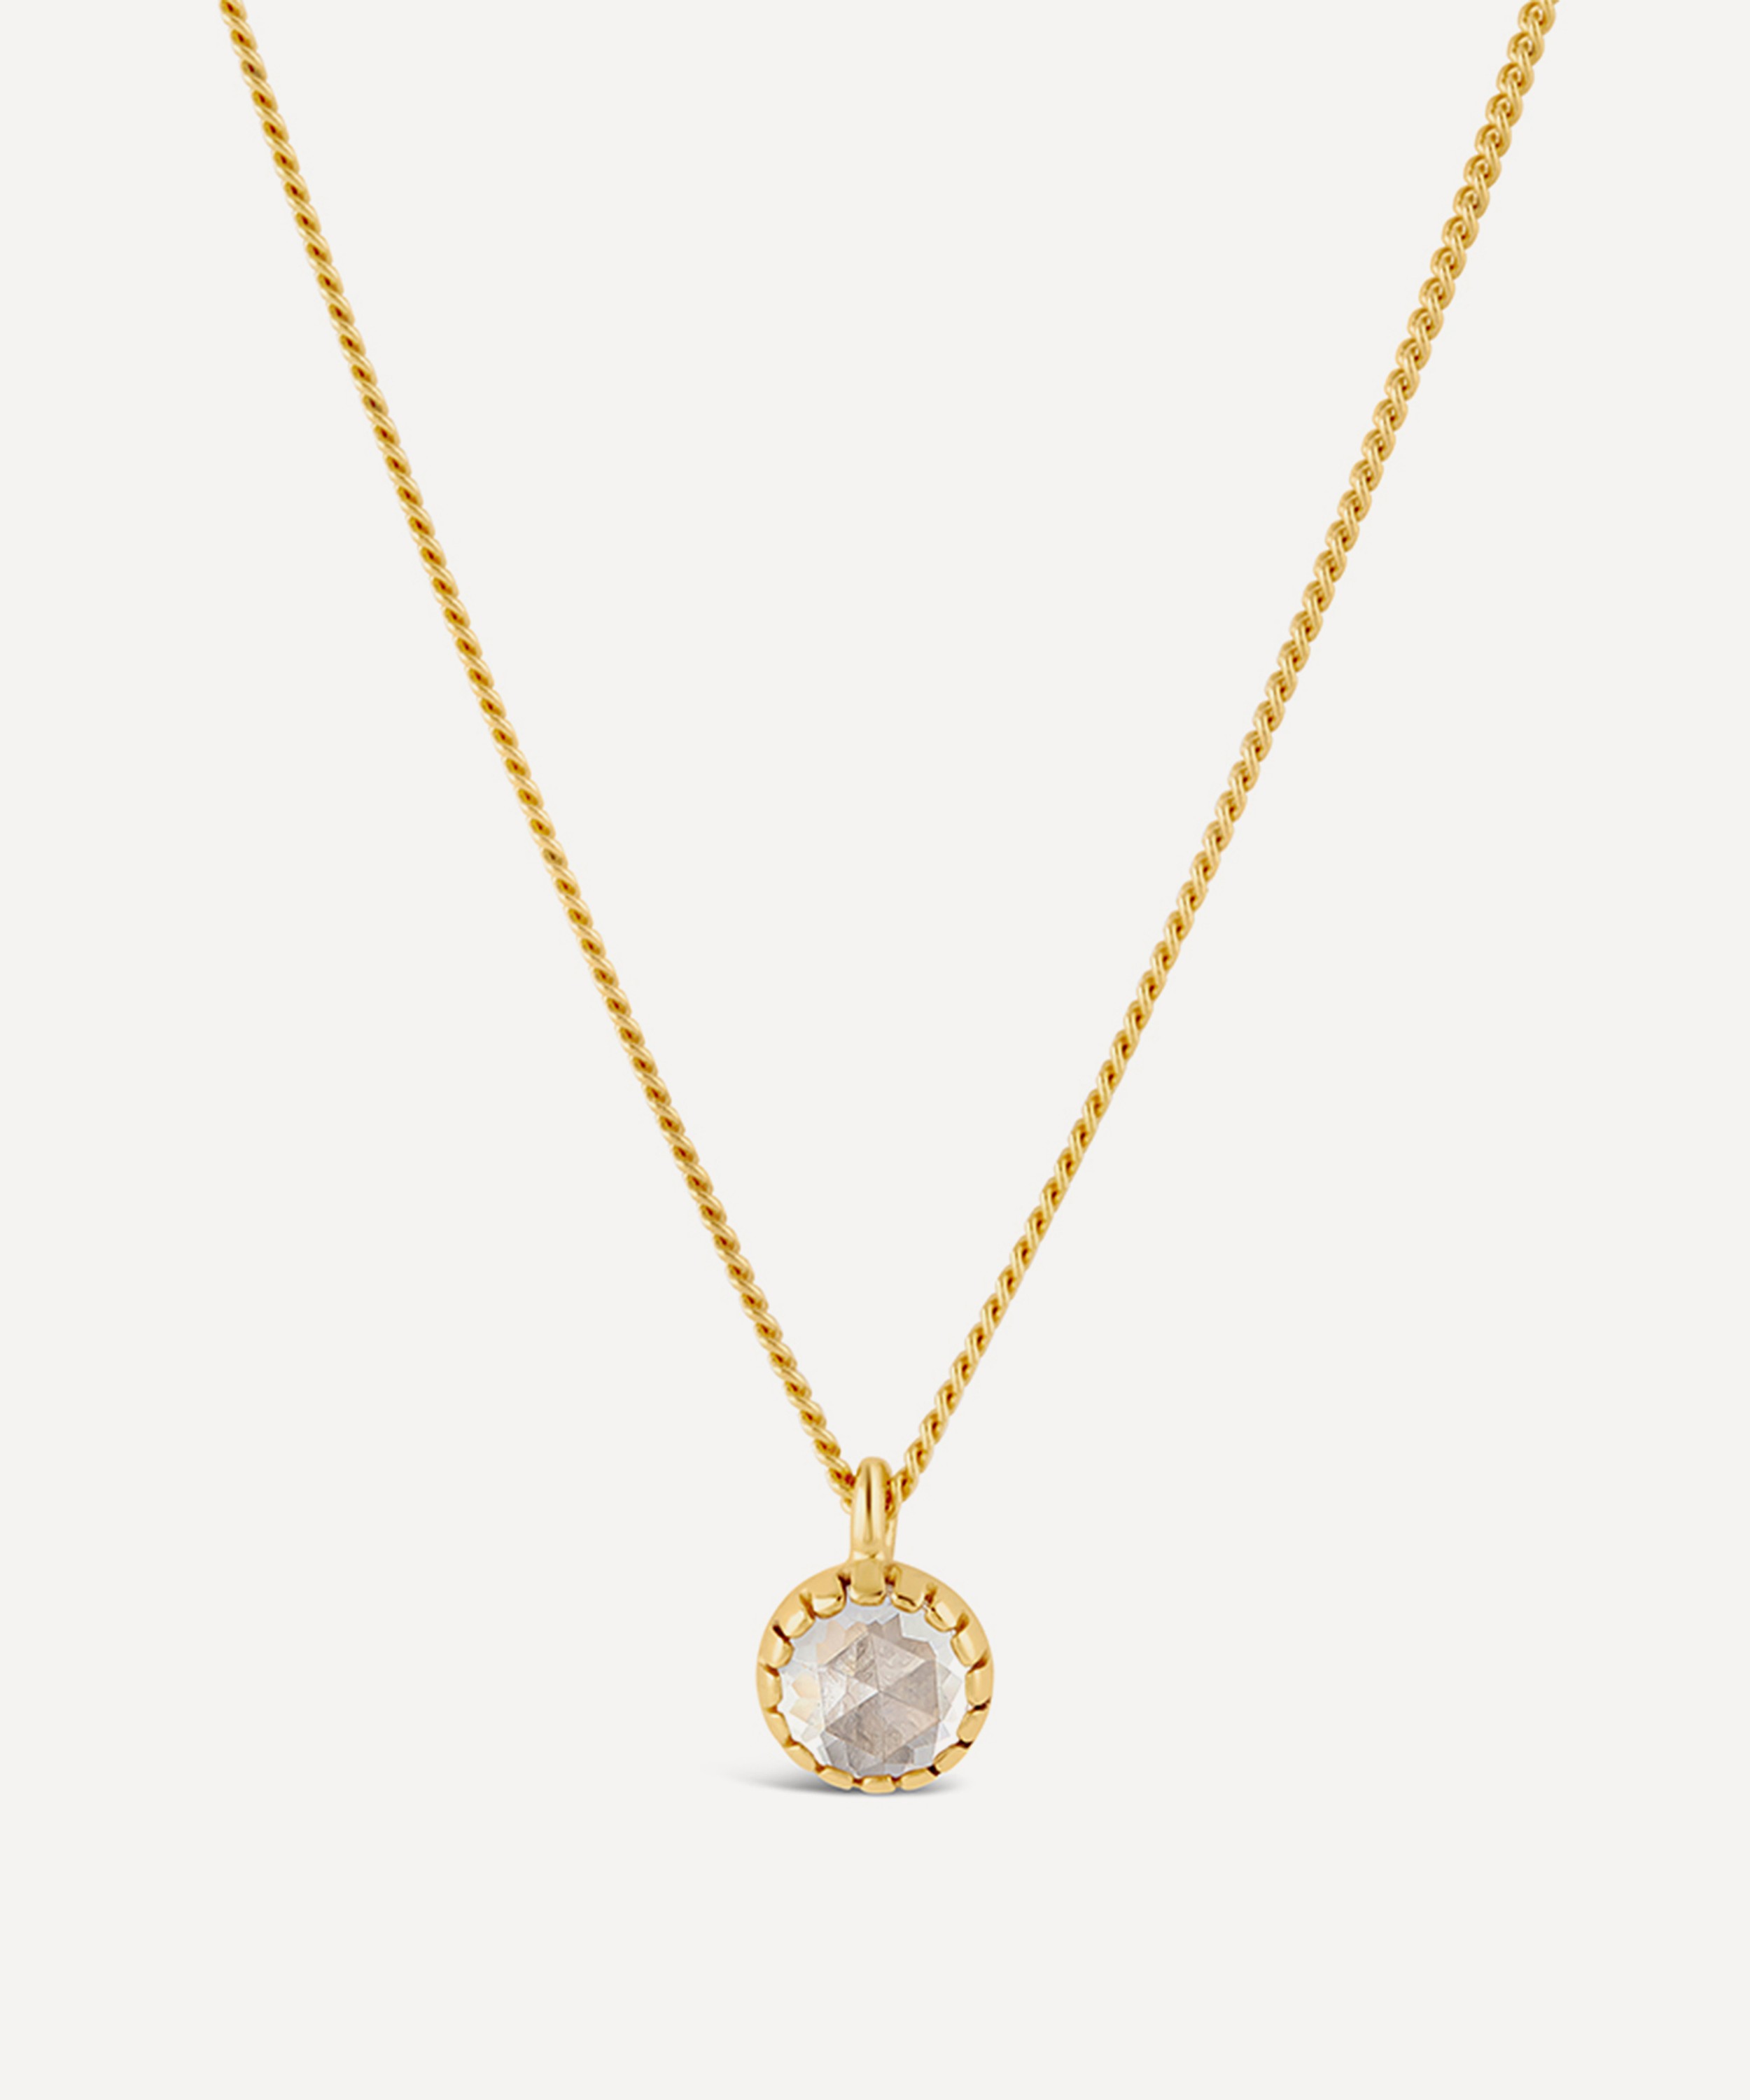 Dinny Hall - 22ct Gold Plated Vermeil Silver Gem Drop Small Rose Cut White Topaz Pendant Necklace